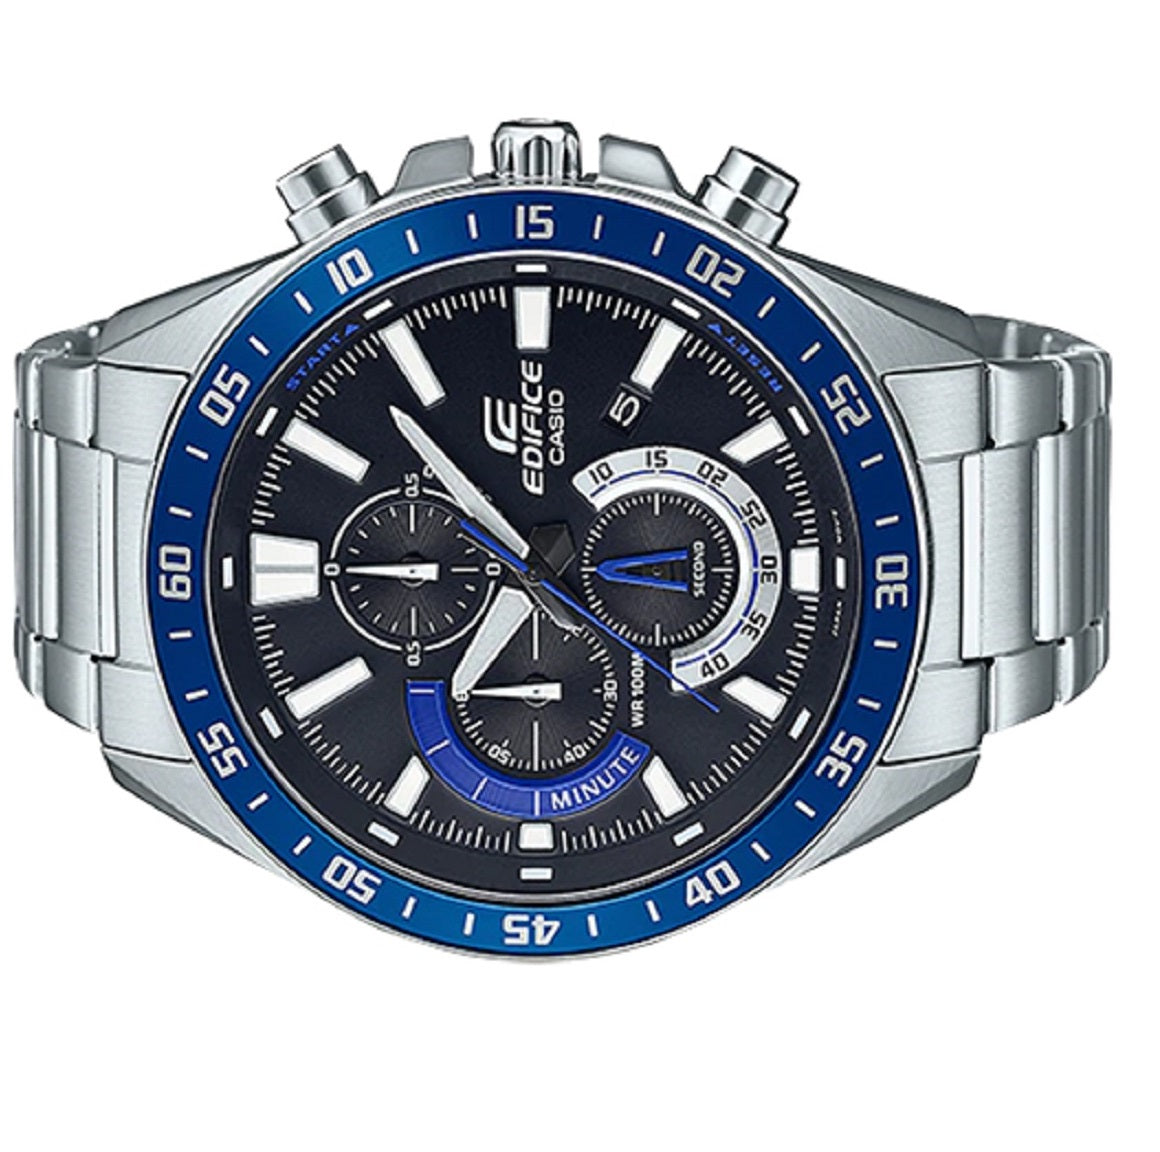 Casio Edifice EFV-620D-1A2 Chronograph Stainless Steel Strap Watch For Men-Watch Portal Philippines